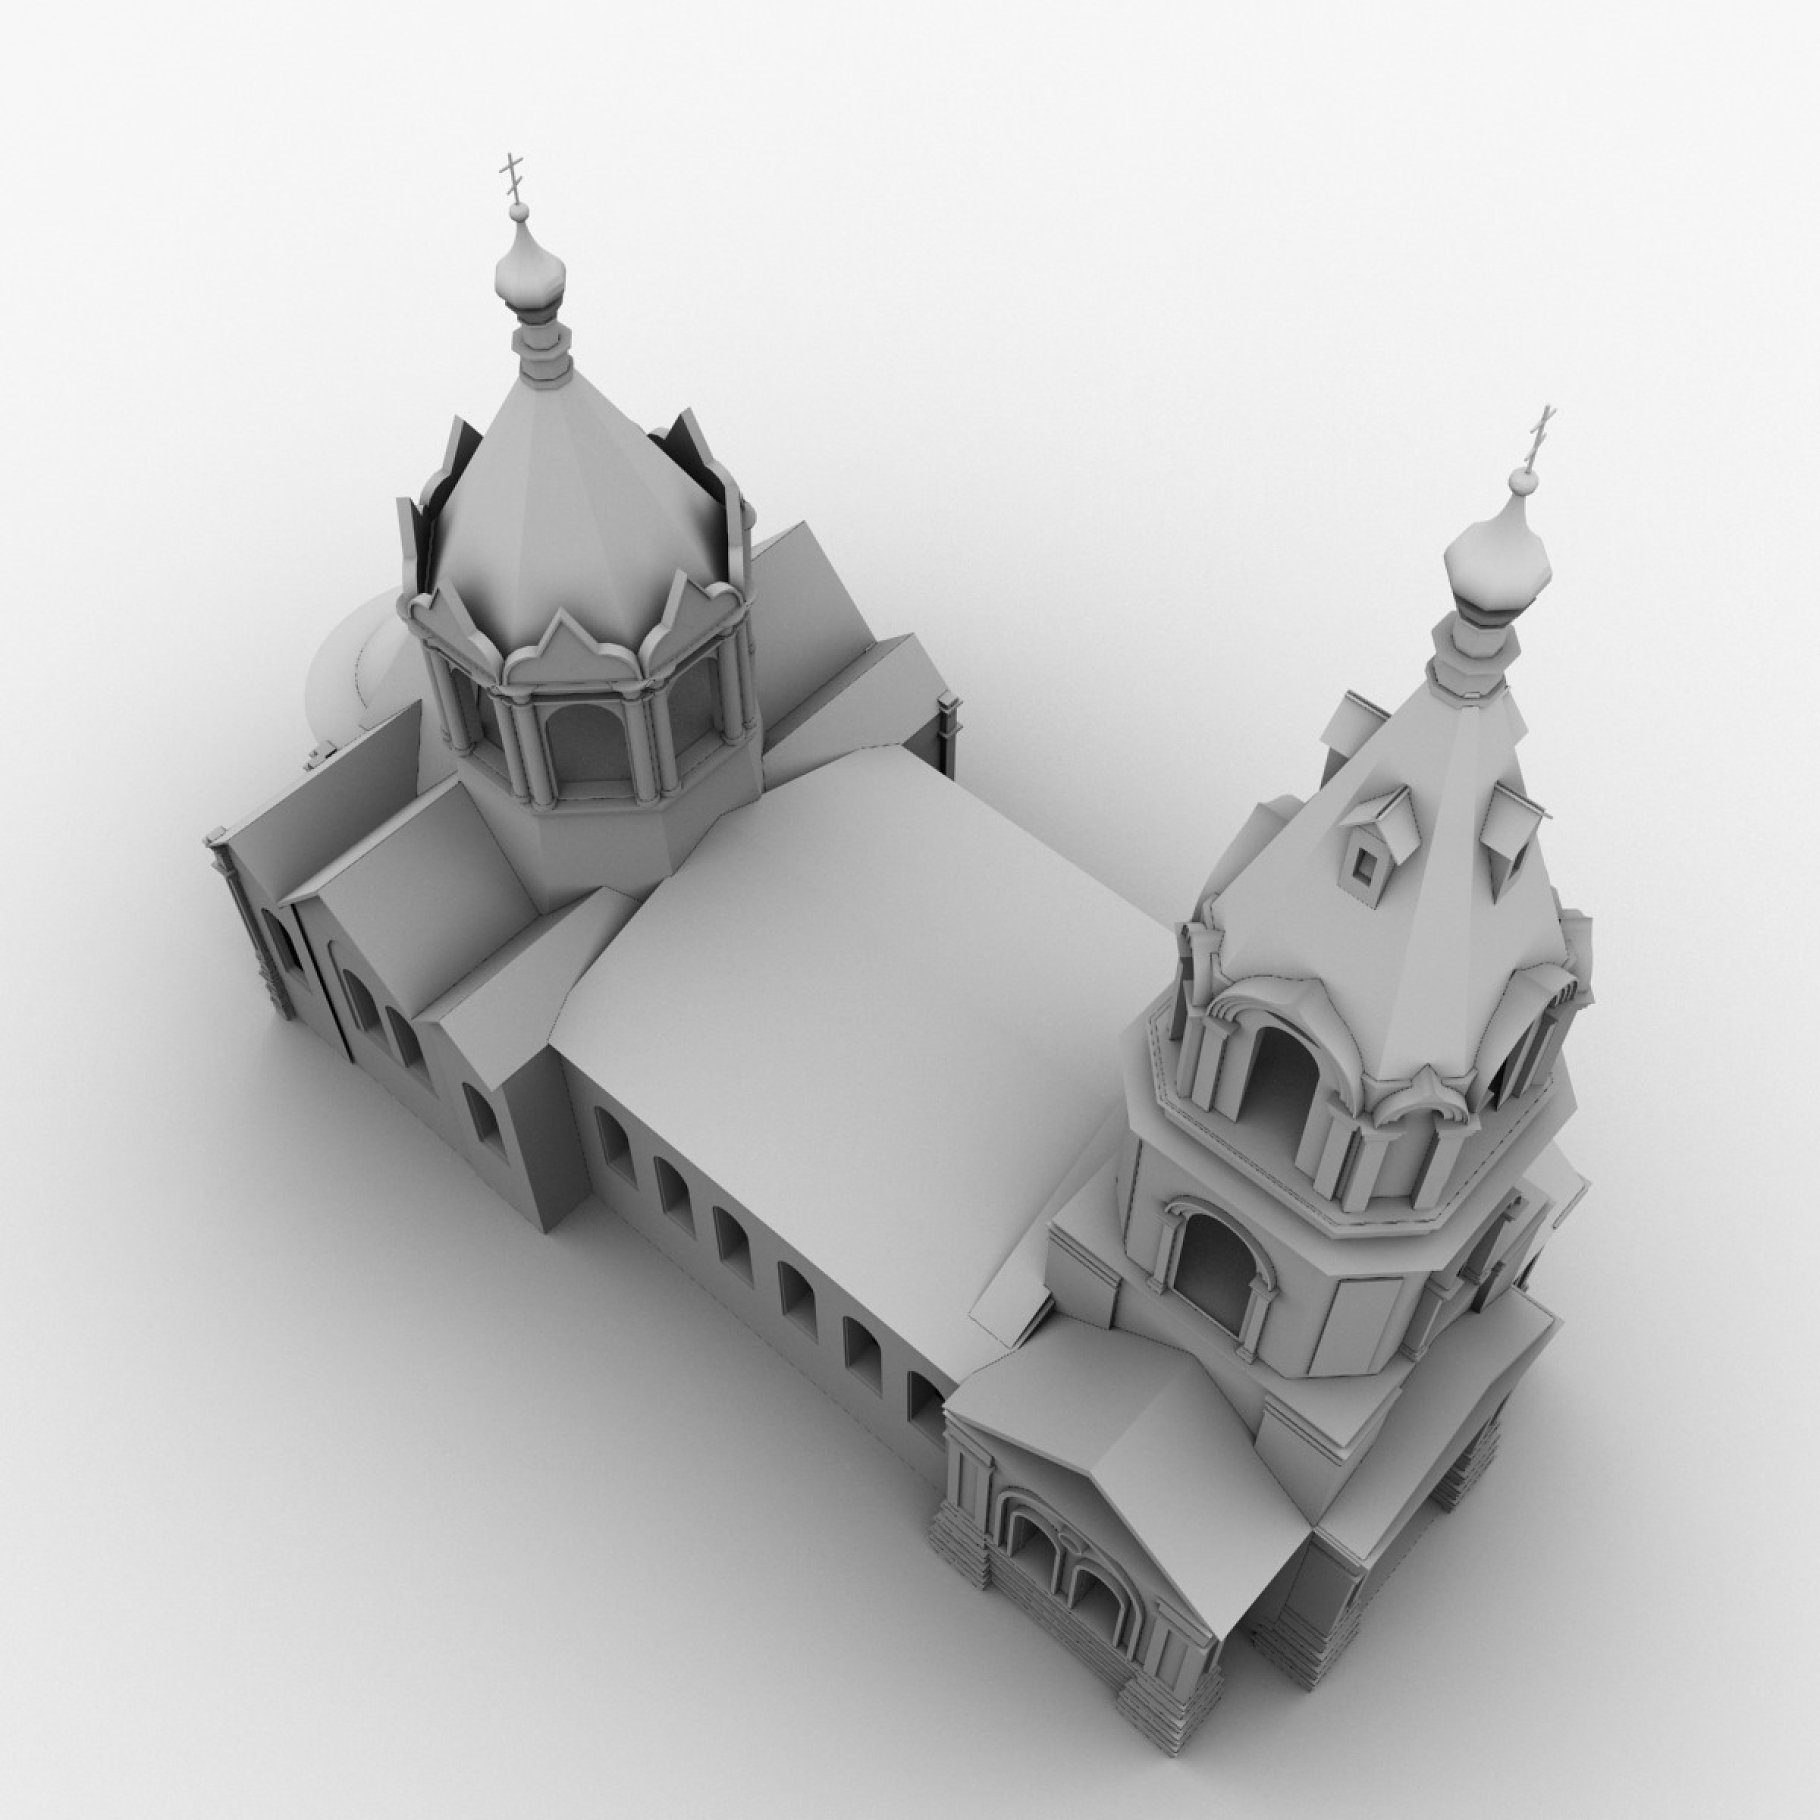 Church model from top to bottom.